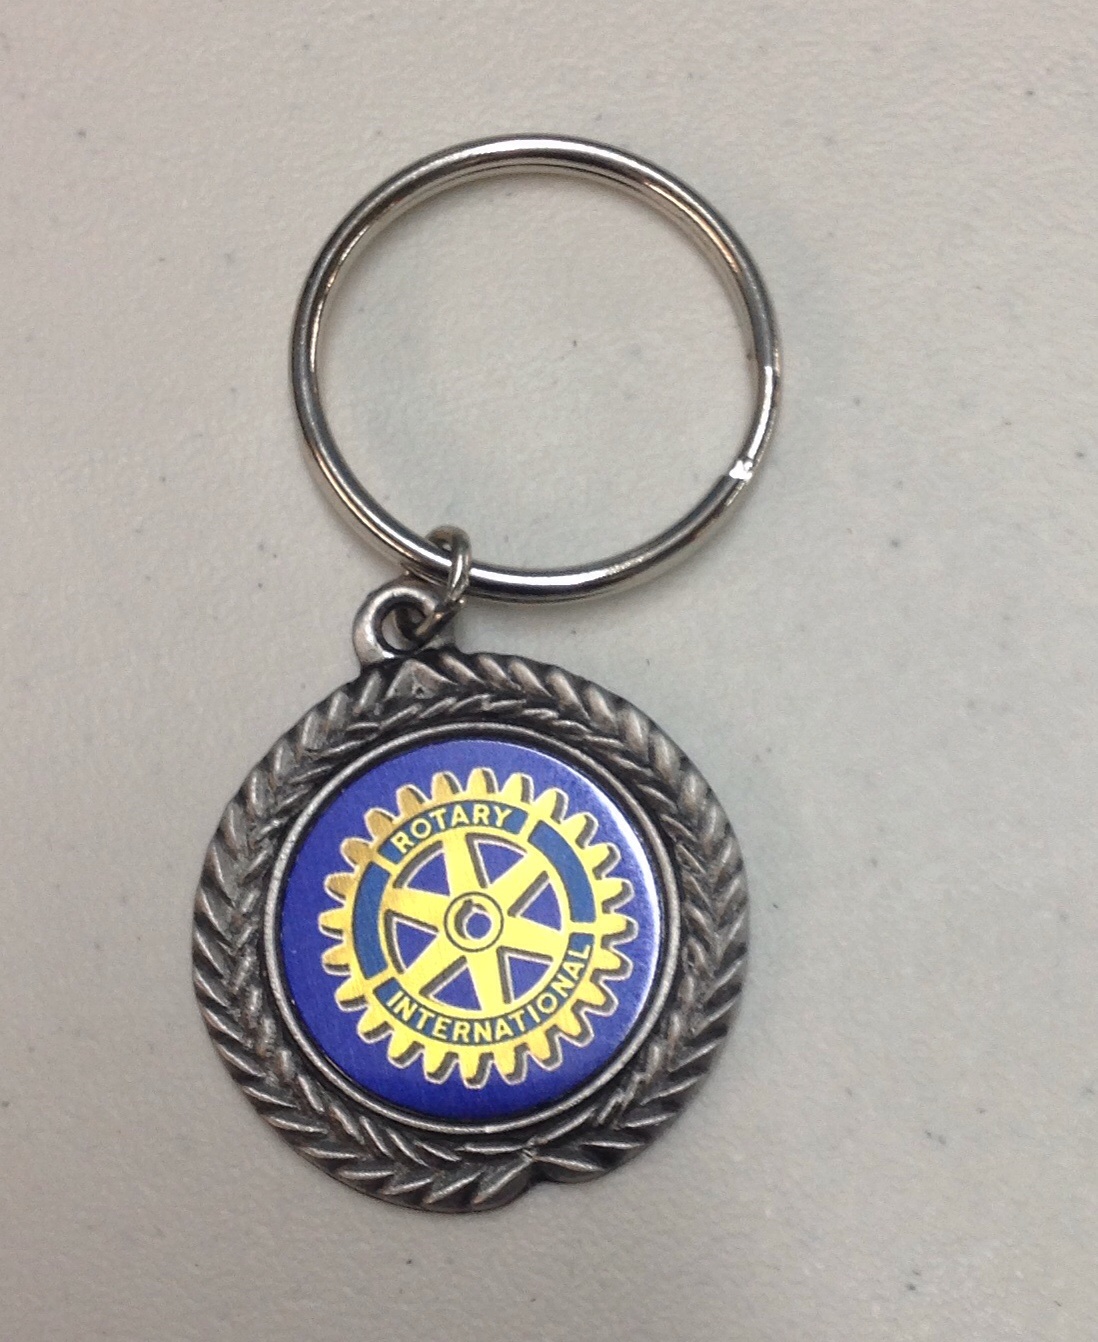 Award Keychain made with sublimation printing